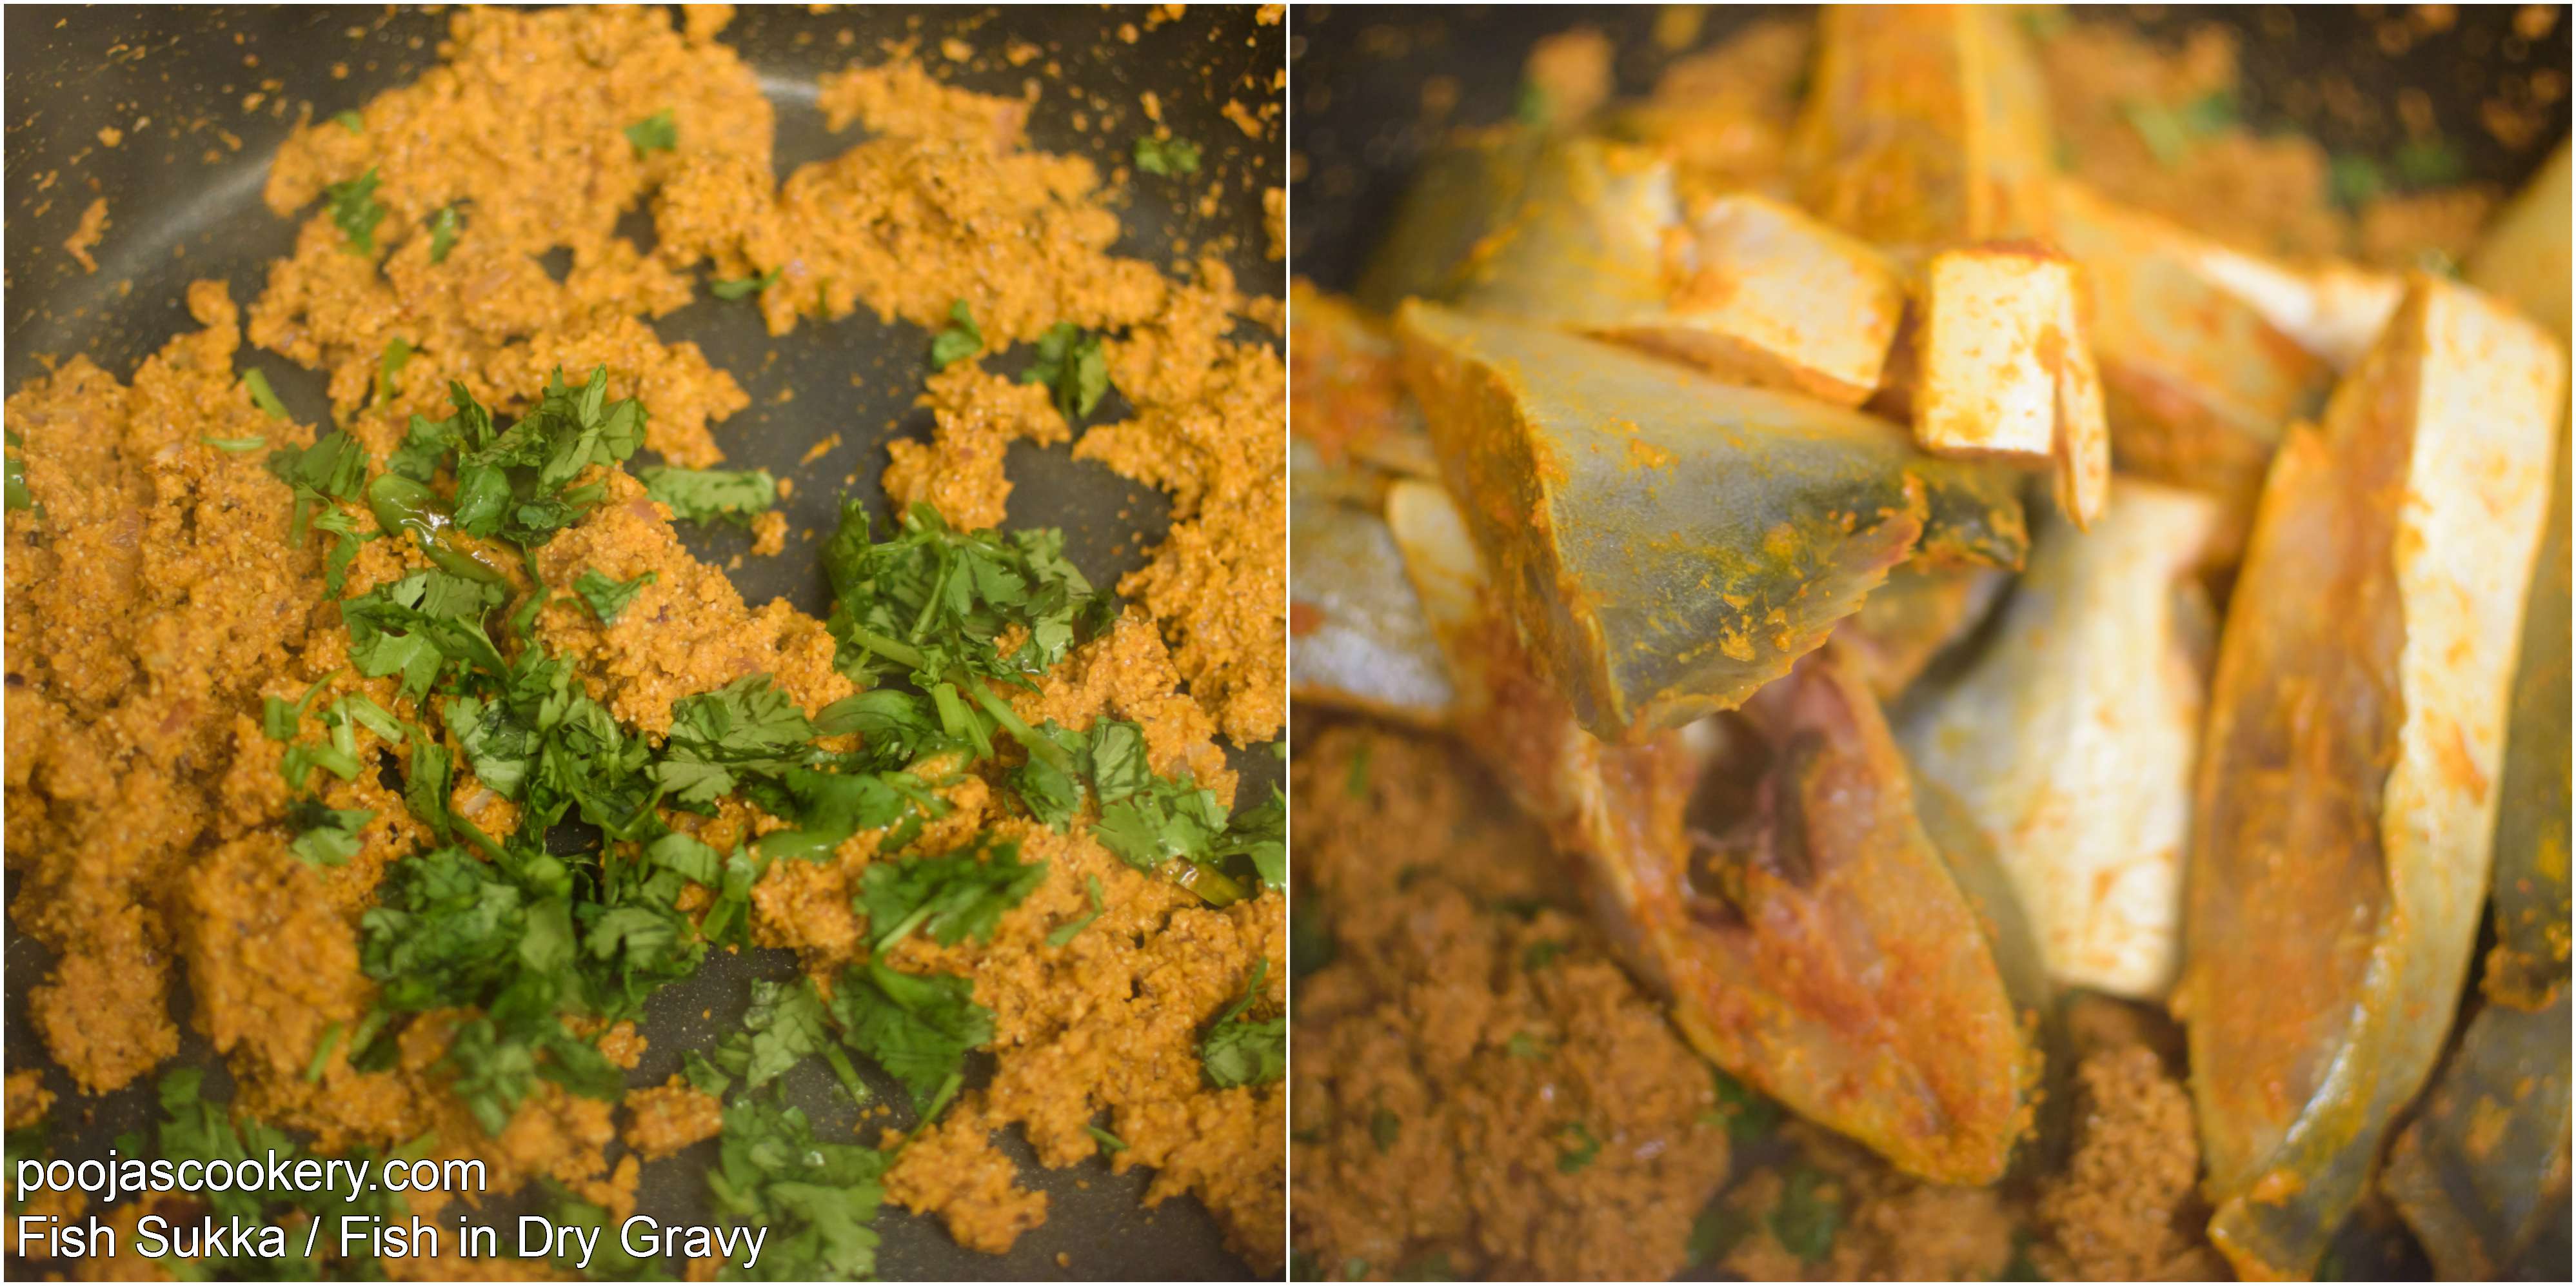 Coriander leaves and fish added to sauted paste| poojascookery.com